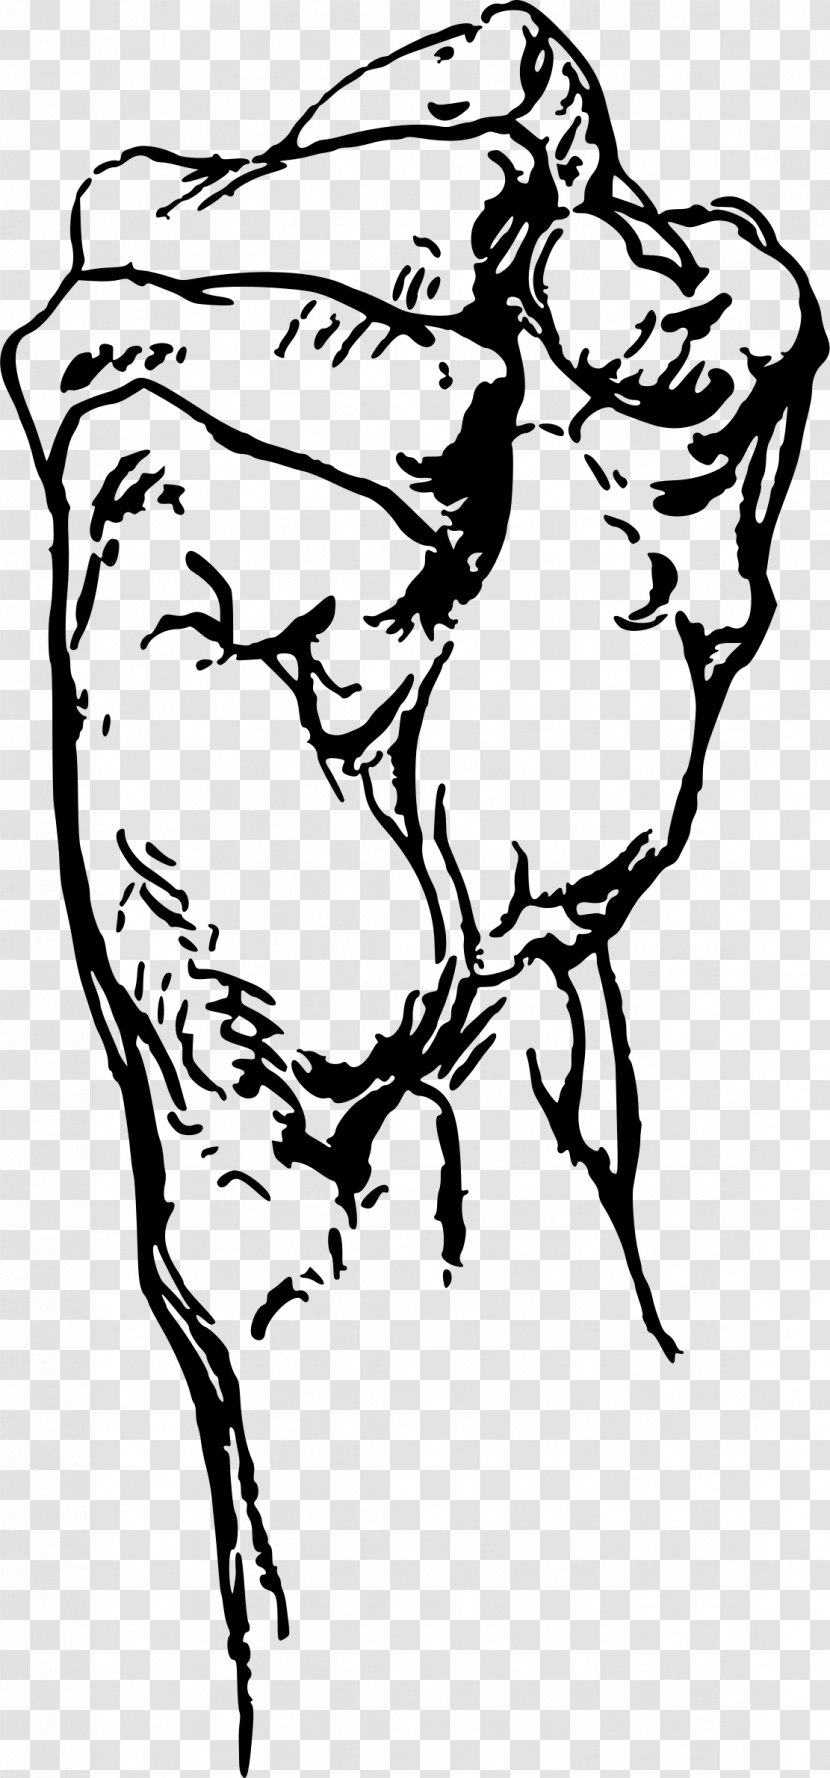 Constructive Anatomy Drawing Human Art - Silhouette - Clenched Fist Transparent PNG